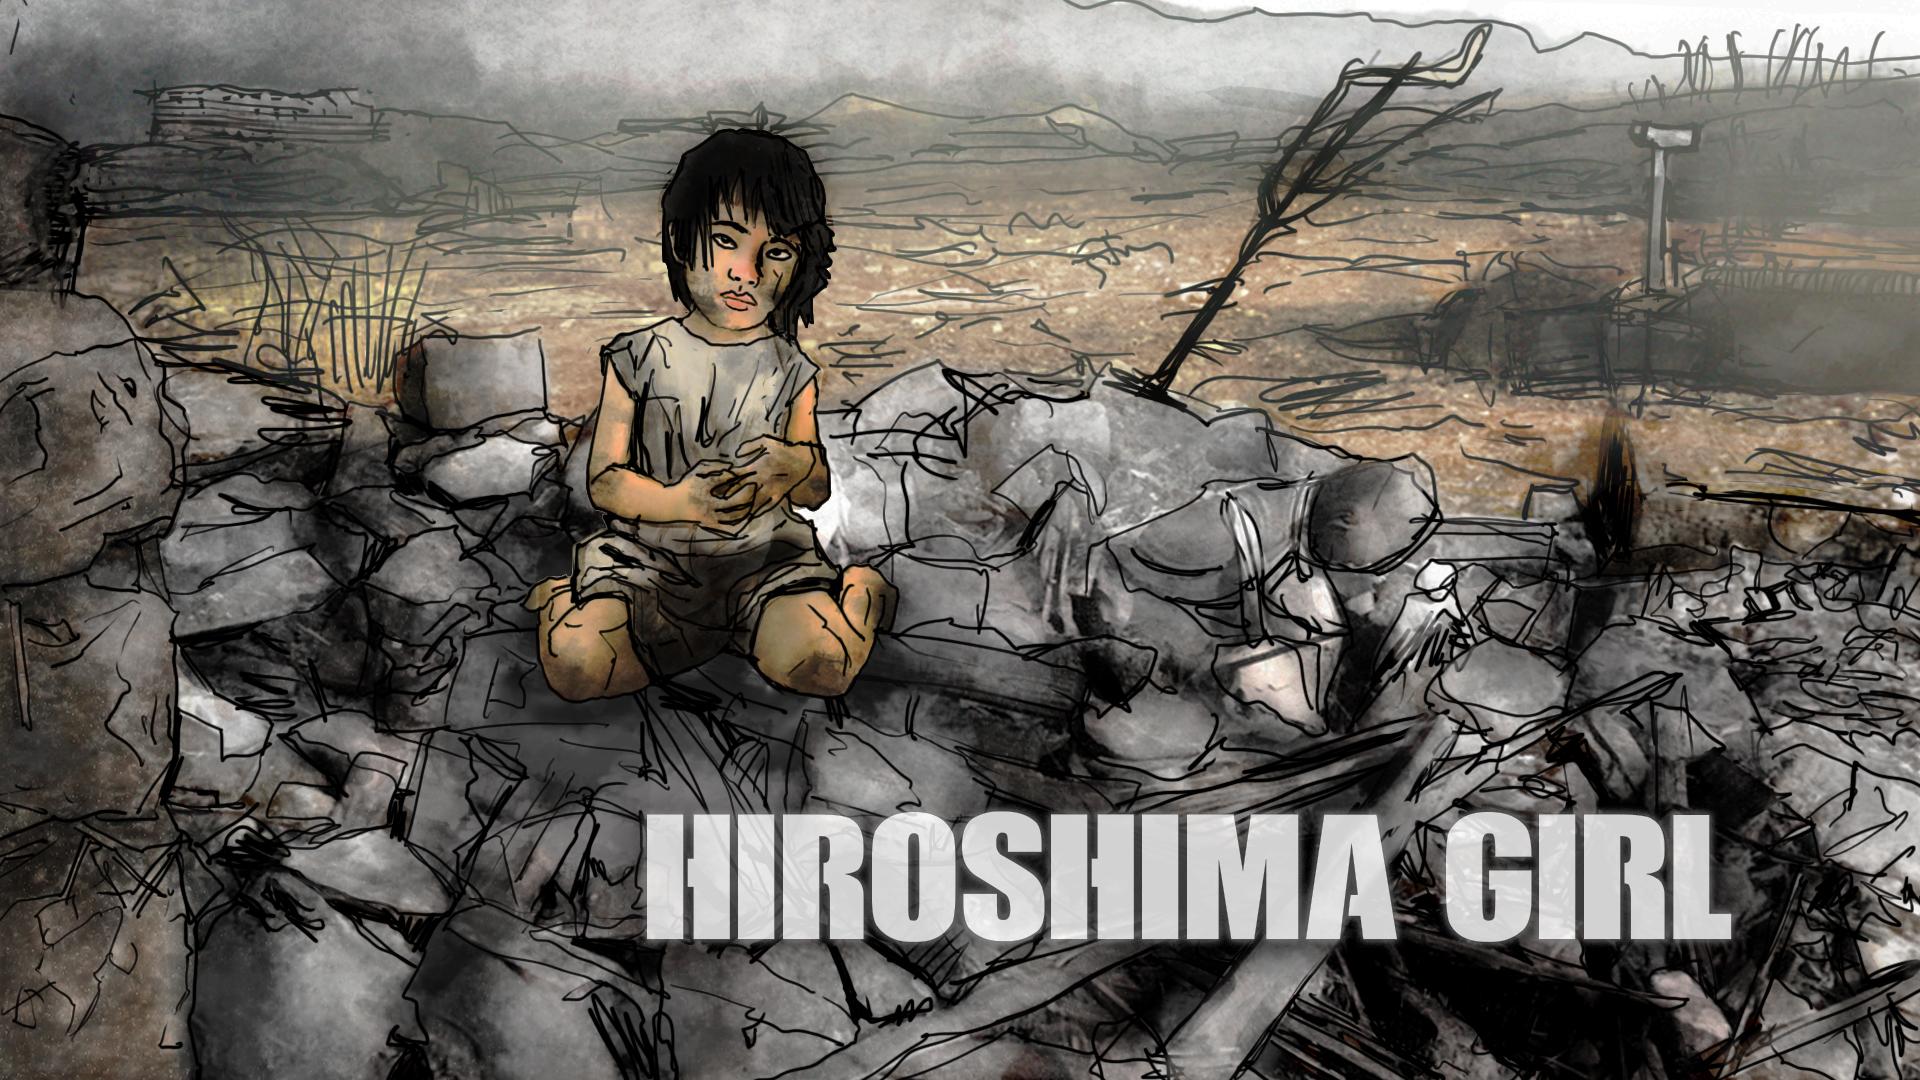 Hiroshima Girl: Illustration by Etienne Cipriani